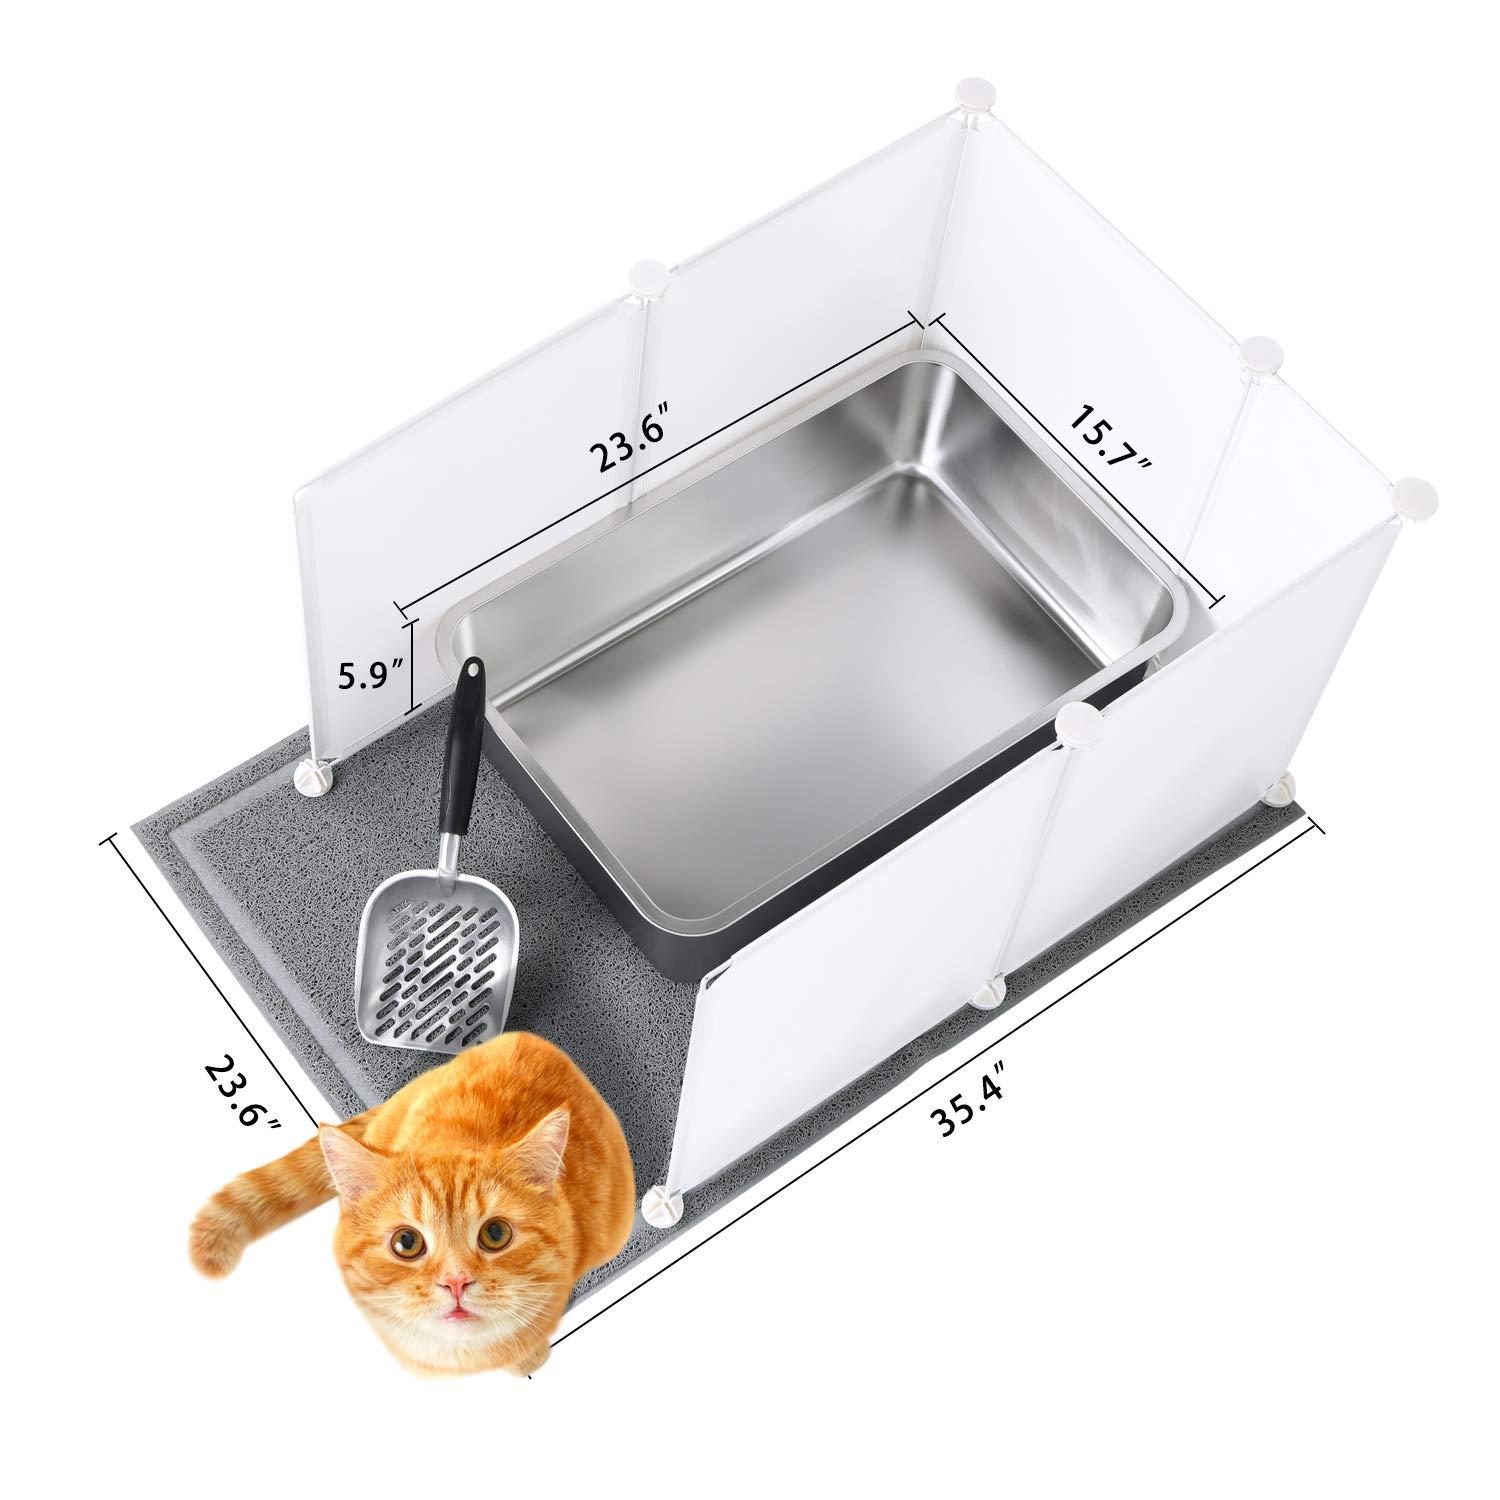 MEEXPAWS Extra Large Giant Stainless Steel Litter Box for Cats (24